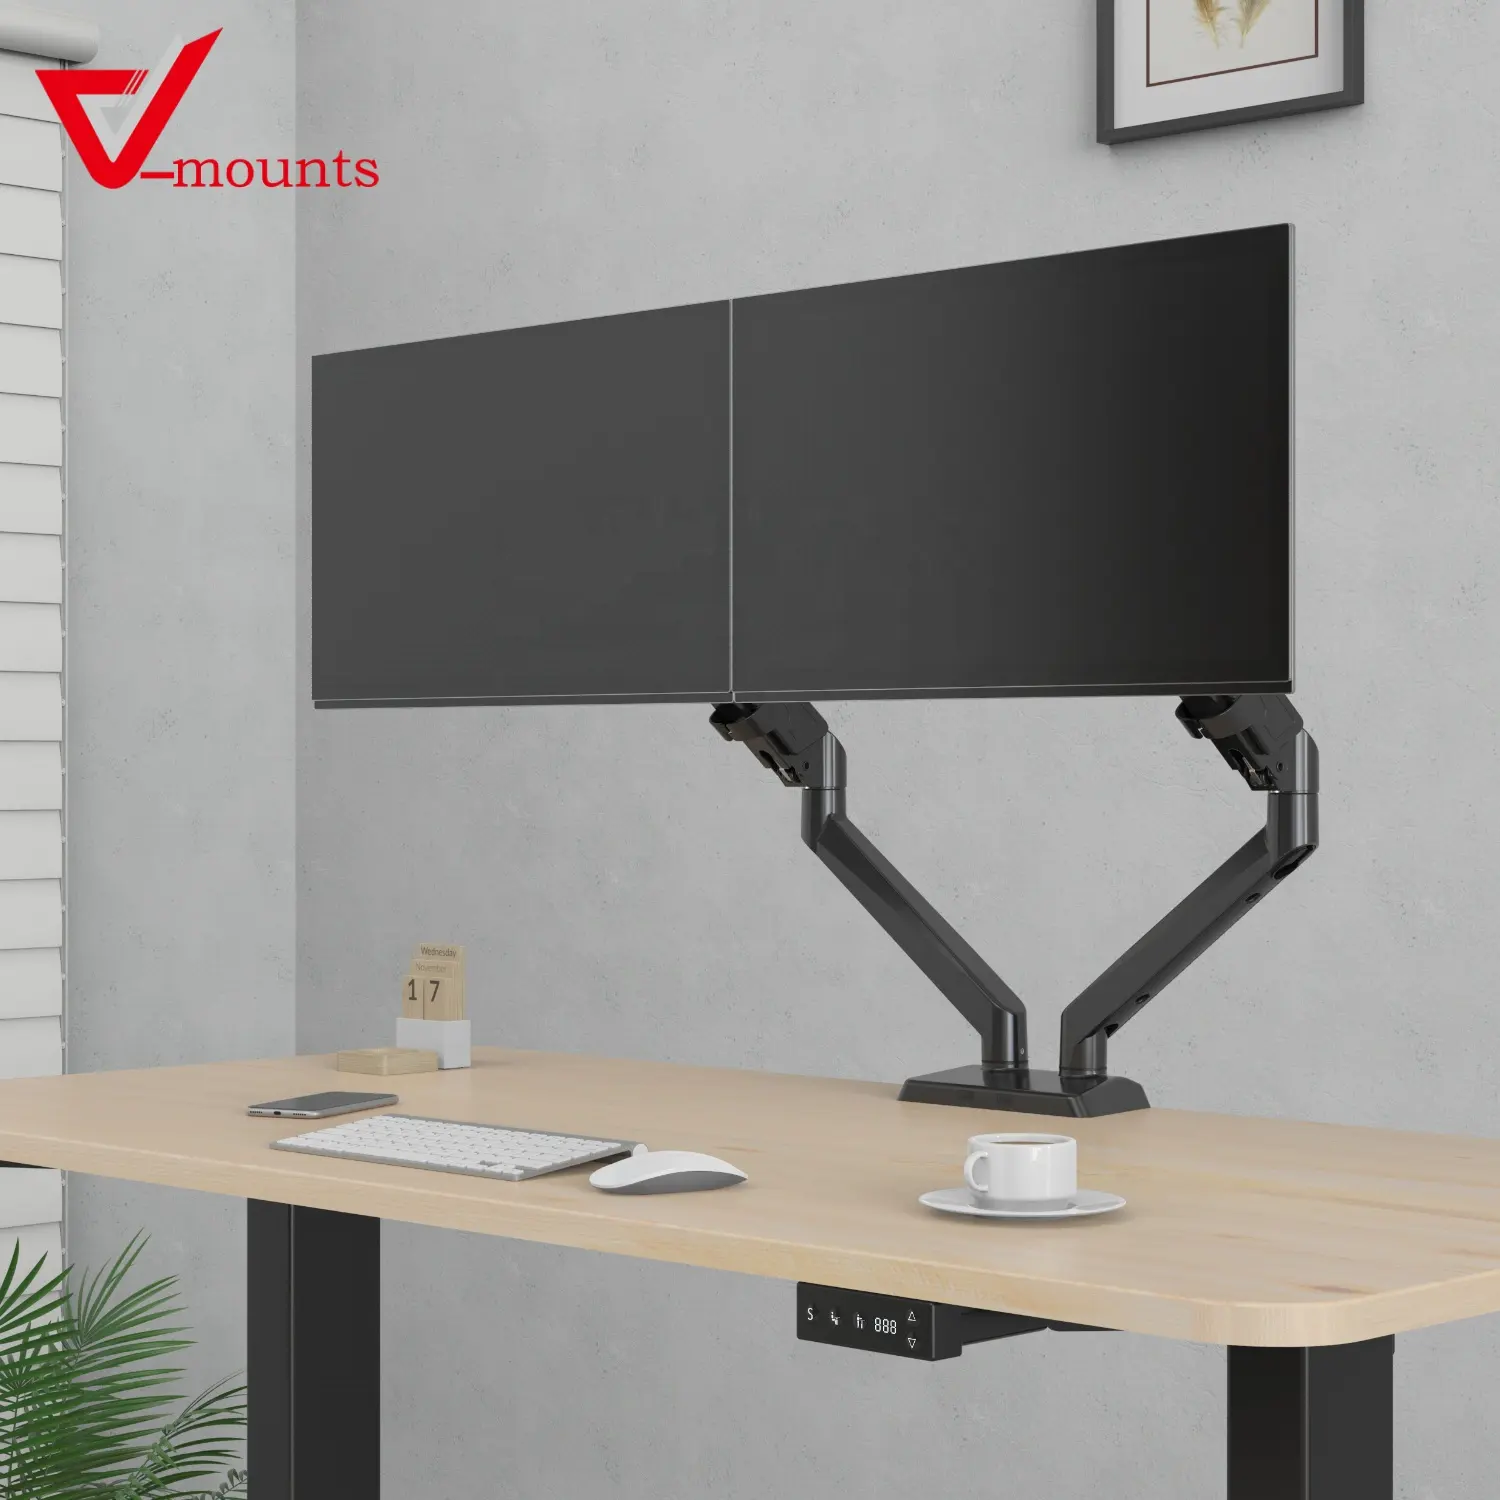 V-mounts Simple Installation Gas Spring Adjustable Dual Screen Monitor Mount Arm With Panel Quick Insert Function